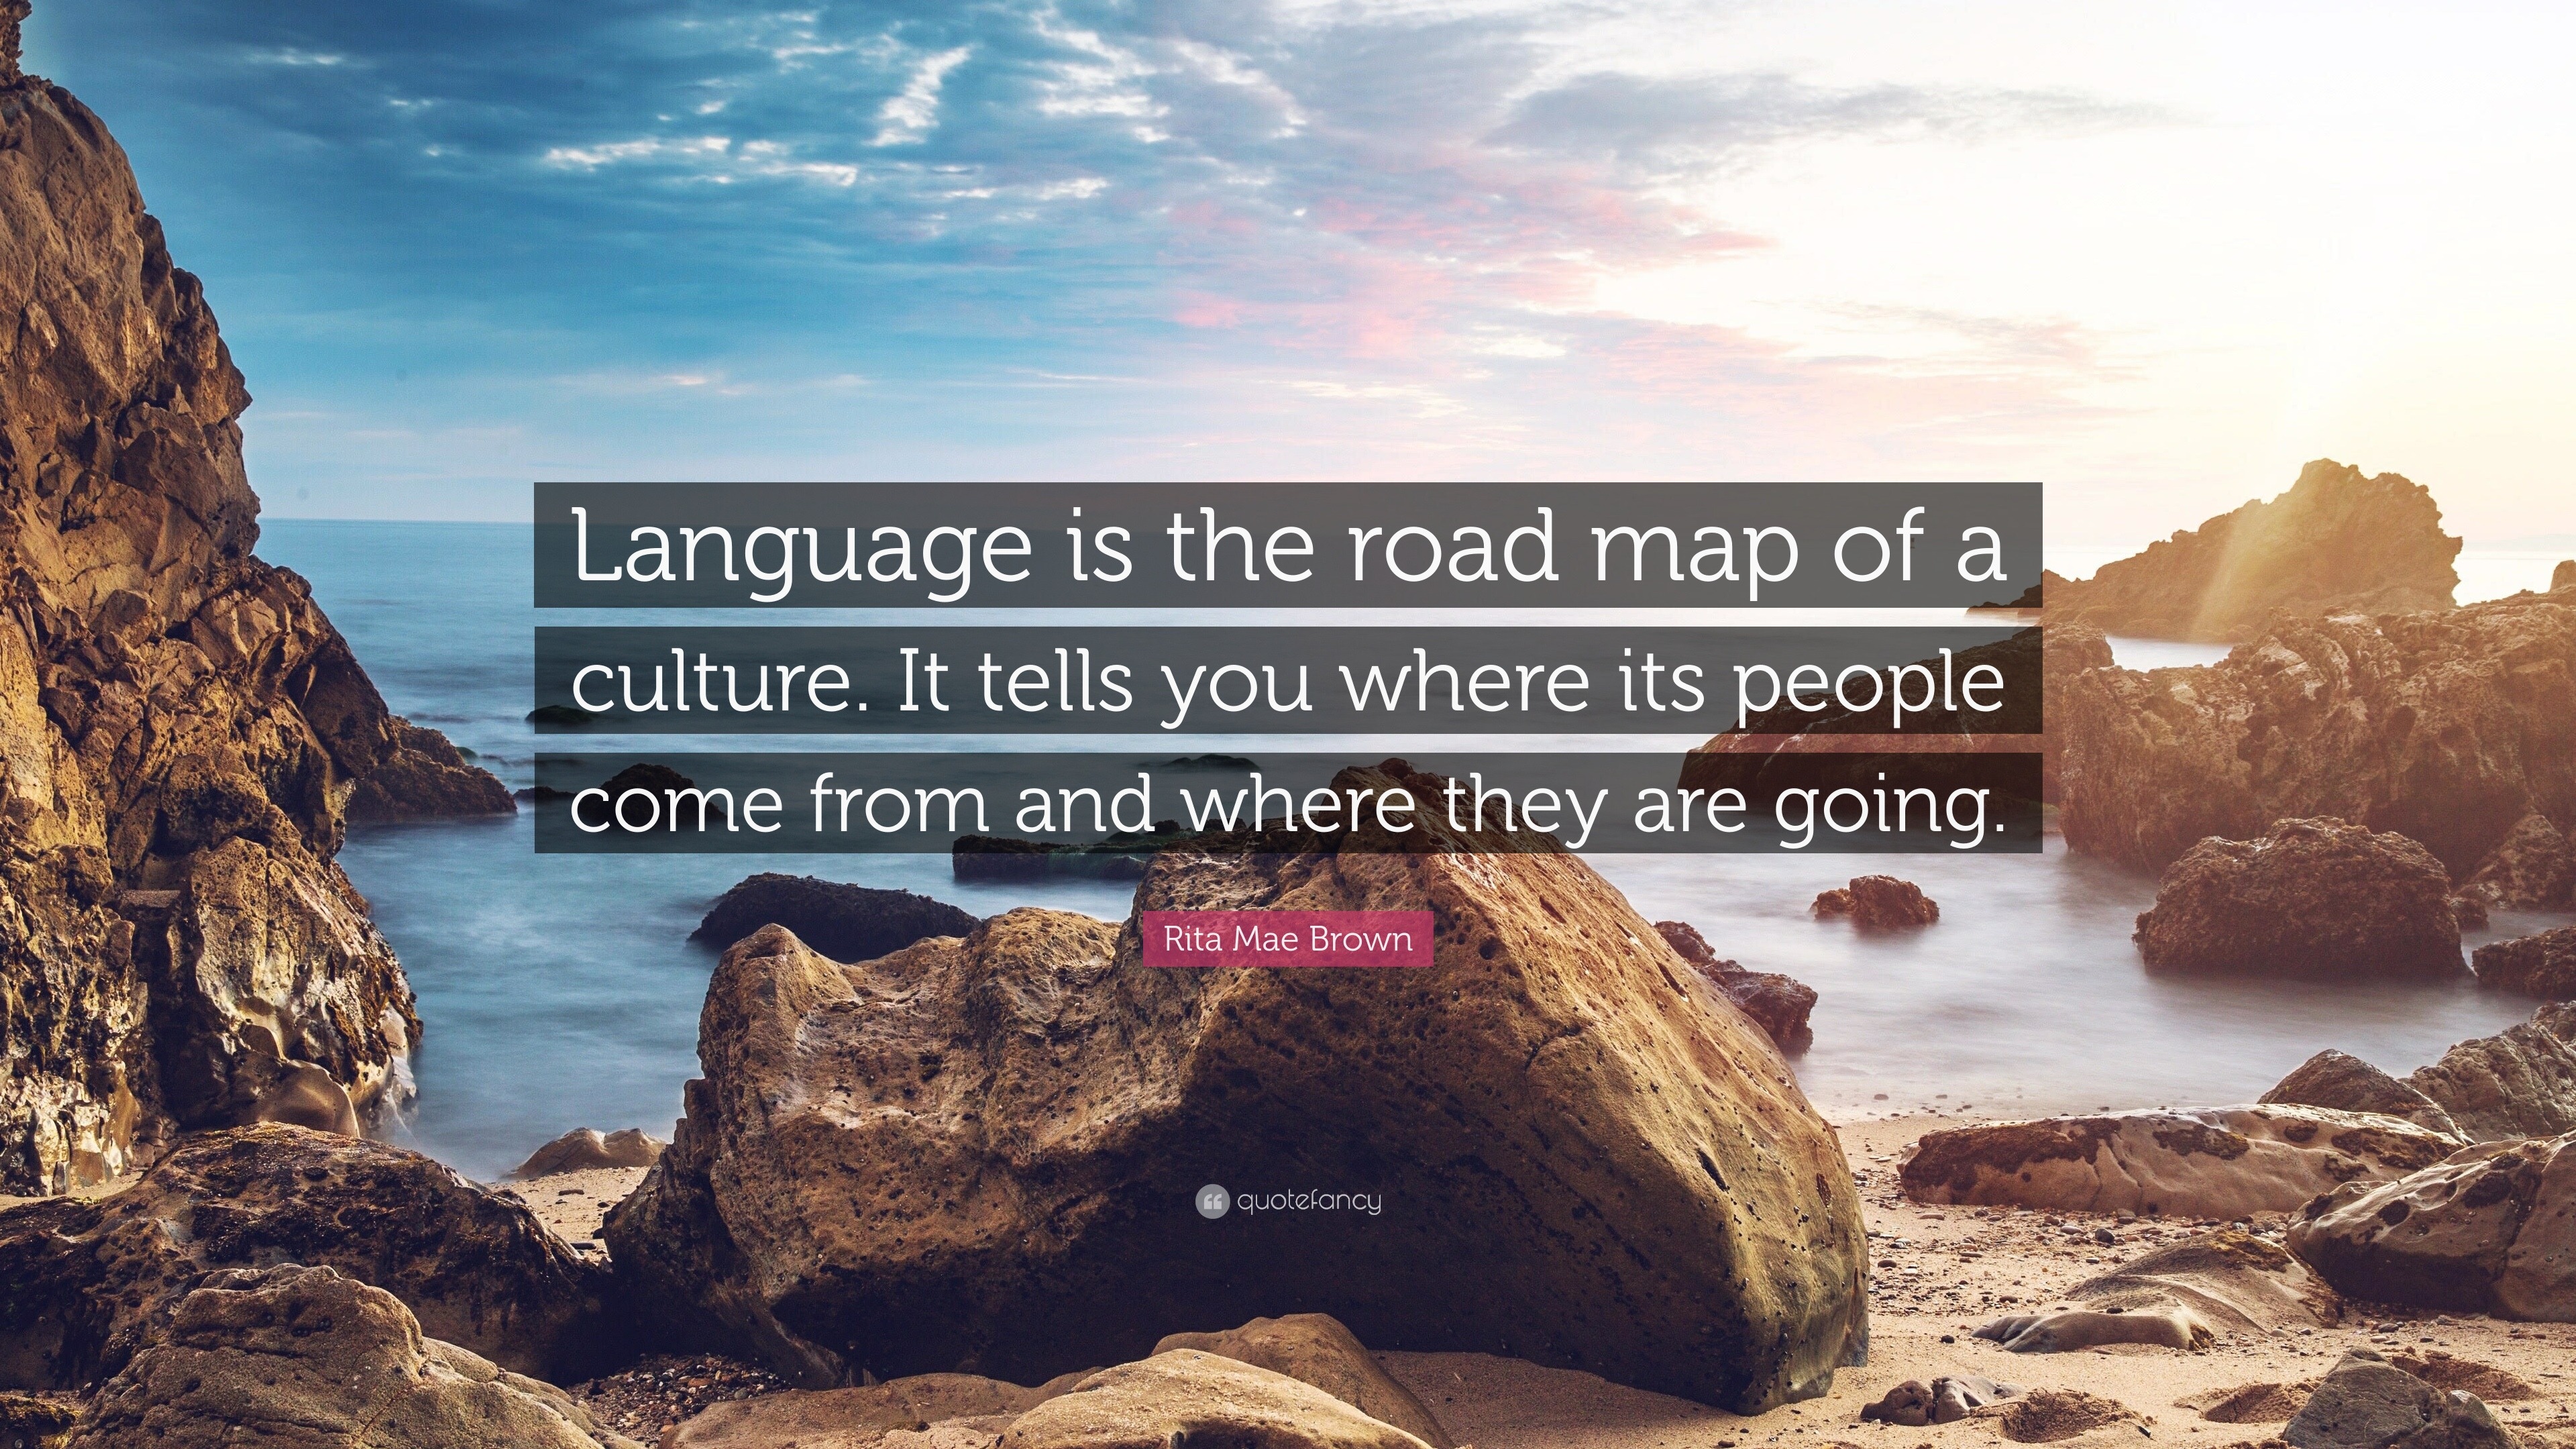 Rita Mae Brown Quote Language Is The Road Map Of A Culture It Tells You Where